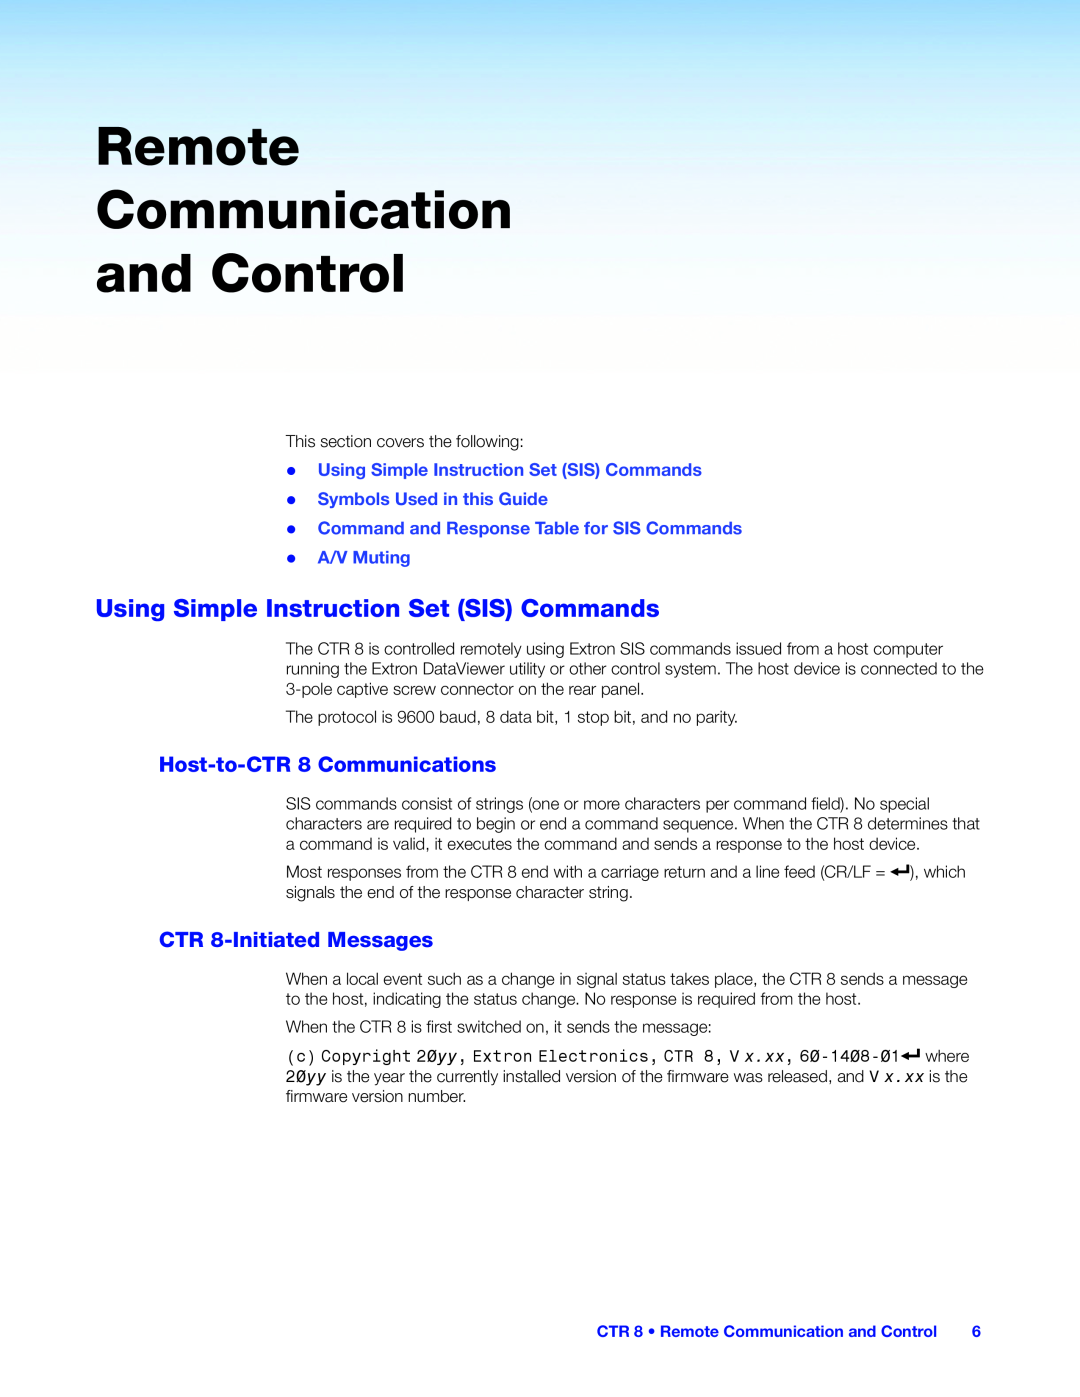 Extron electronic CTR 8 manual Remote Communication and Control, Using Simple Instruction Set SIS Commands 